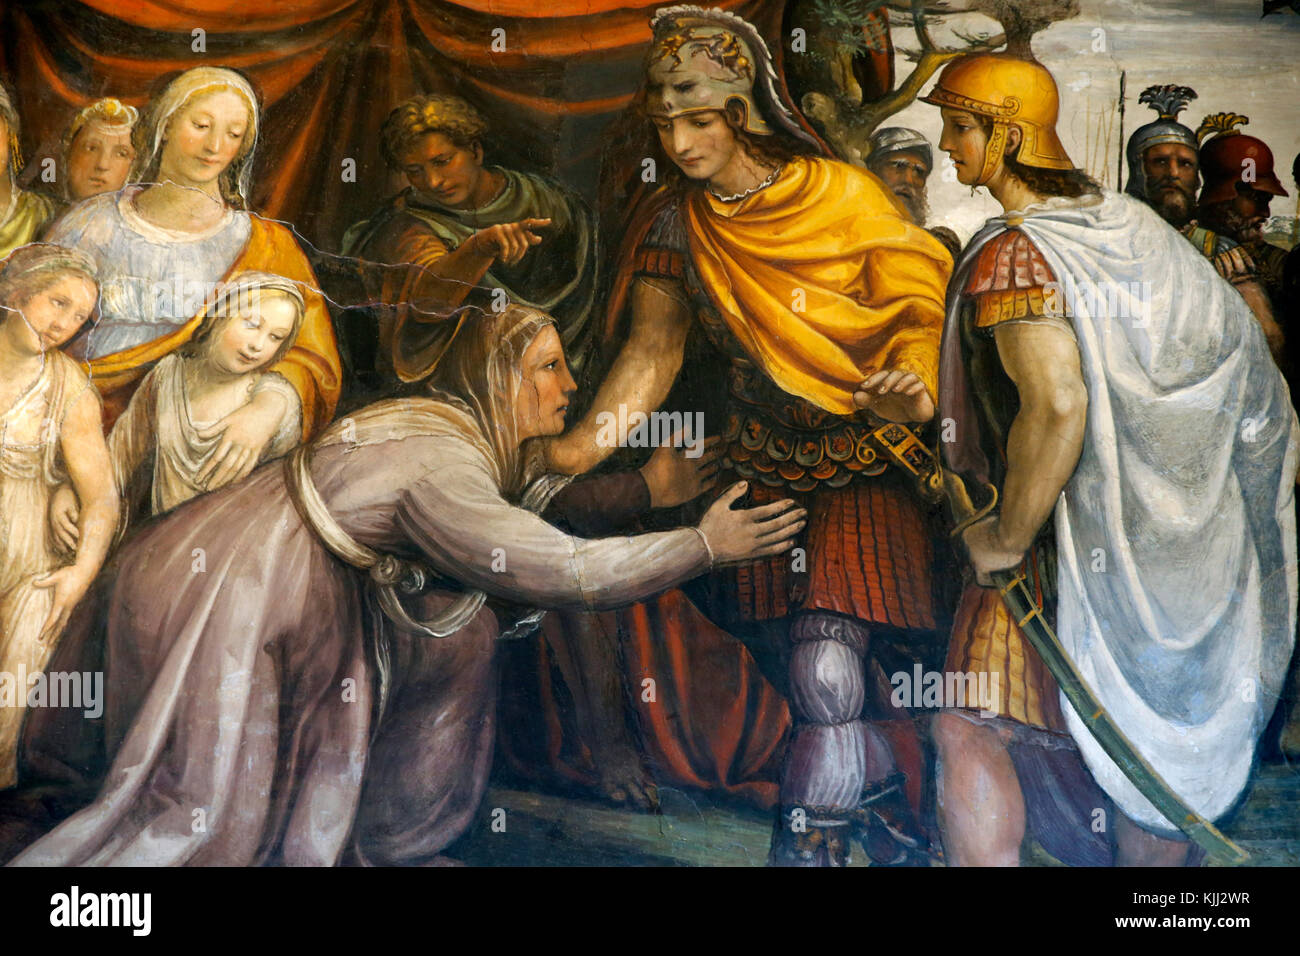 Villa Farnesina, Rome. The room of the marriage of Alexander the great and Roxane. Detail : Alexander pardoning and welcoming the mother of the Persia Stock Photo